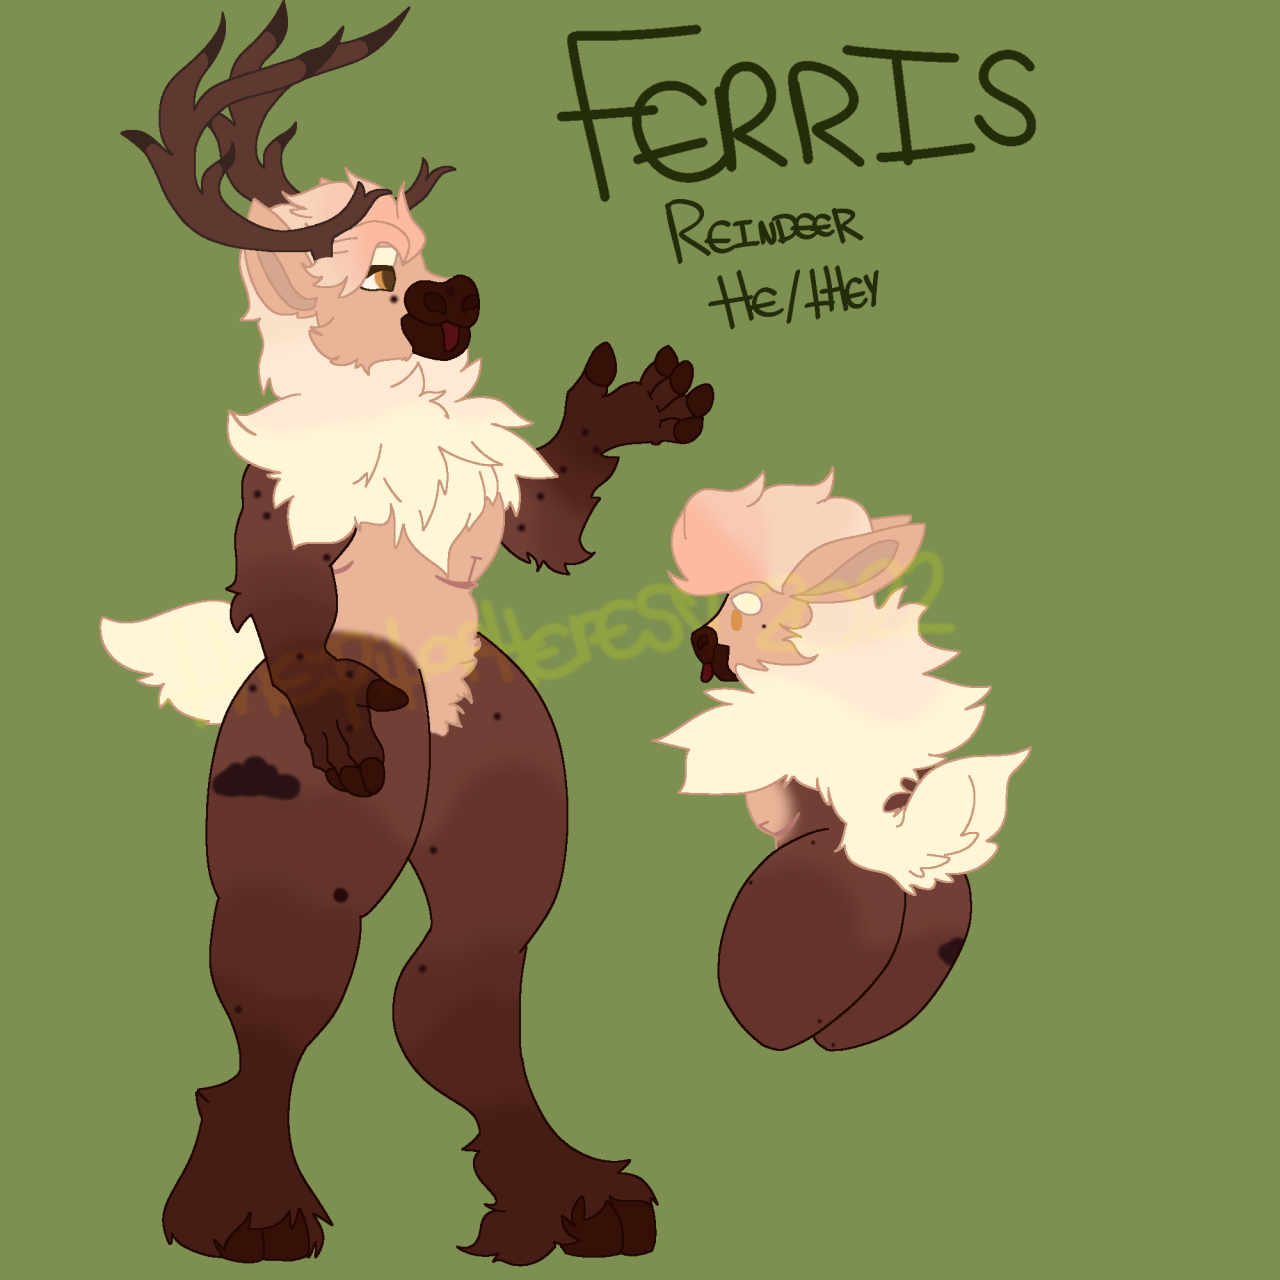 [image id: An anthropomorphic caribou character named Ferris standing in front of a matcha green background. He’s a tall, large fluffy figure. He has light peach fur styled in a short, curly mohawk at the top of his head that starts as a darker rose gold color at the roots then quickly fades the further it goes down his back, eventually ending in a fluffy short tail. Ferris’ face, chest and belly are a soft cream color, whereas the rest of his body is a brown color that fades darker to his extremities. His hooves and the tips of his fingers on both of hands are dark brown, as are his muzzle and lips. Ferris has large dark brown antlers shaped like a crescent. He has a dark brown blob birthmark on his left upper thigh shaped like a cloud, and he has many dark brown beauty marks scattered across his body in various spots on his face, arms, thighs and legs. Ferris is sticking his tongue out, and has golden colored eyes. On his chest, Ferris has thin inverted T scars under his pecs. /end ID]Meet Ferris! He’s a Caribou. He has a naturally sweet, kind and loyal disposition, and is a bit of a himbo. You wouldn’t guess that by night he works as a thief stealing from rich people, though. He’s also a clubber and loves going to raves. Despite being a little shy, he does like making friends.  He also has a little bit of a sweet tooth.  #ferris the caribou #caribou#reindeer#furry#anthro#my aert#fursona#furry oc#my art#text posting